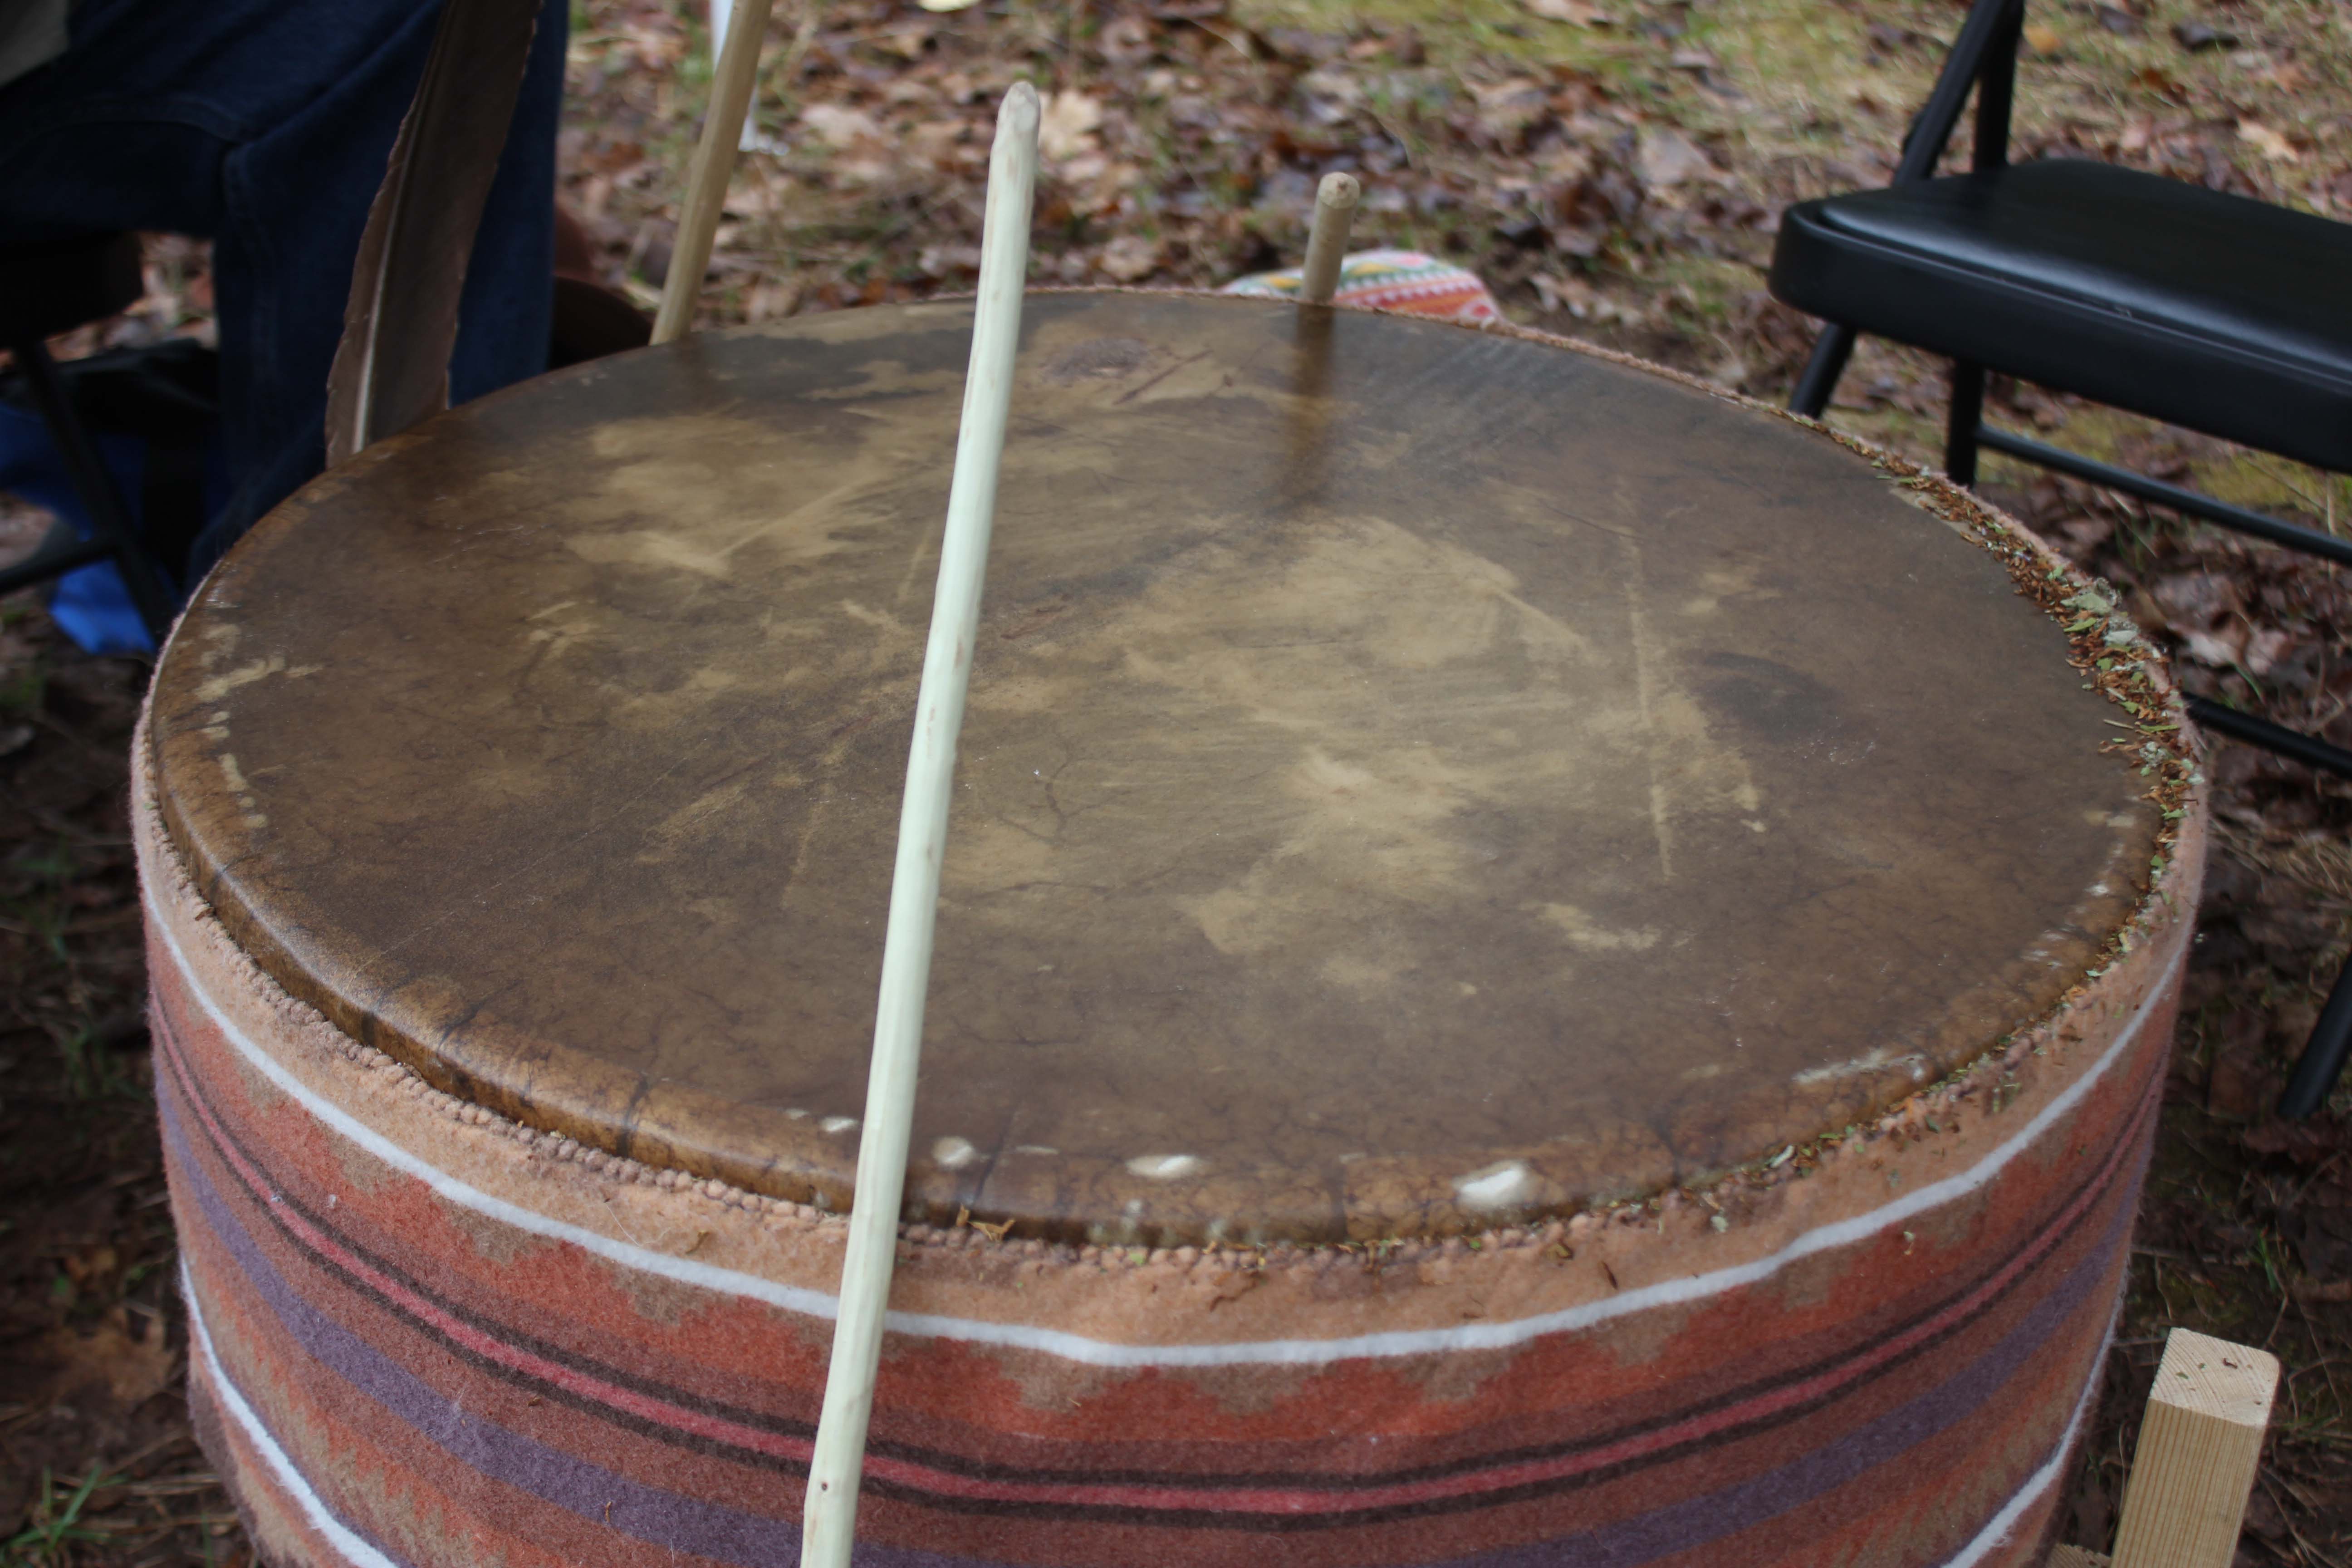 A ceremonial drum, made of elk skin and maple. Inspired by a dream had by Bad River Tribal Elder Bing Lemieux and Red Cliff Tribal Elder and Legend Teller Tony DePerry.Credit Rich Kremer / WPR News